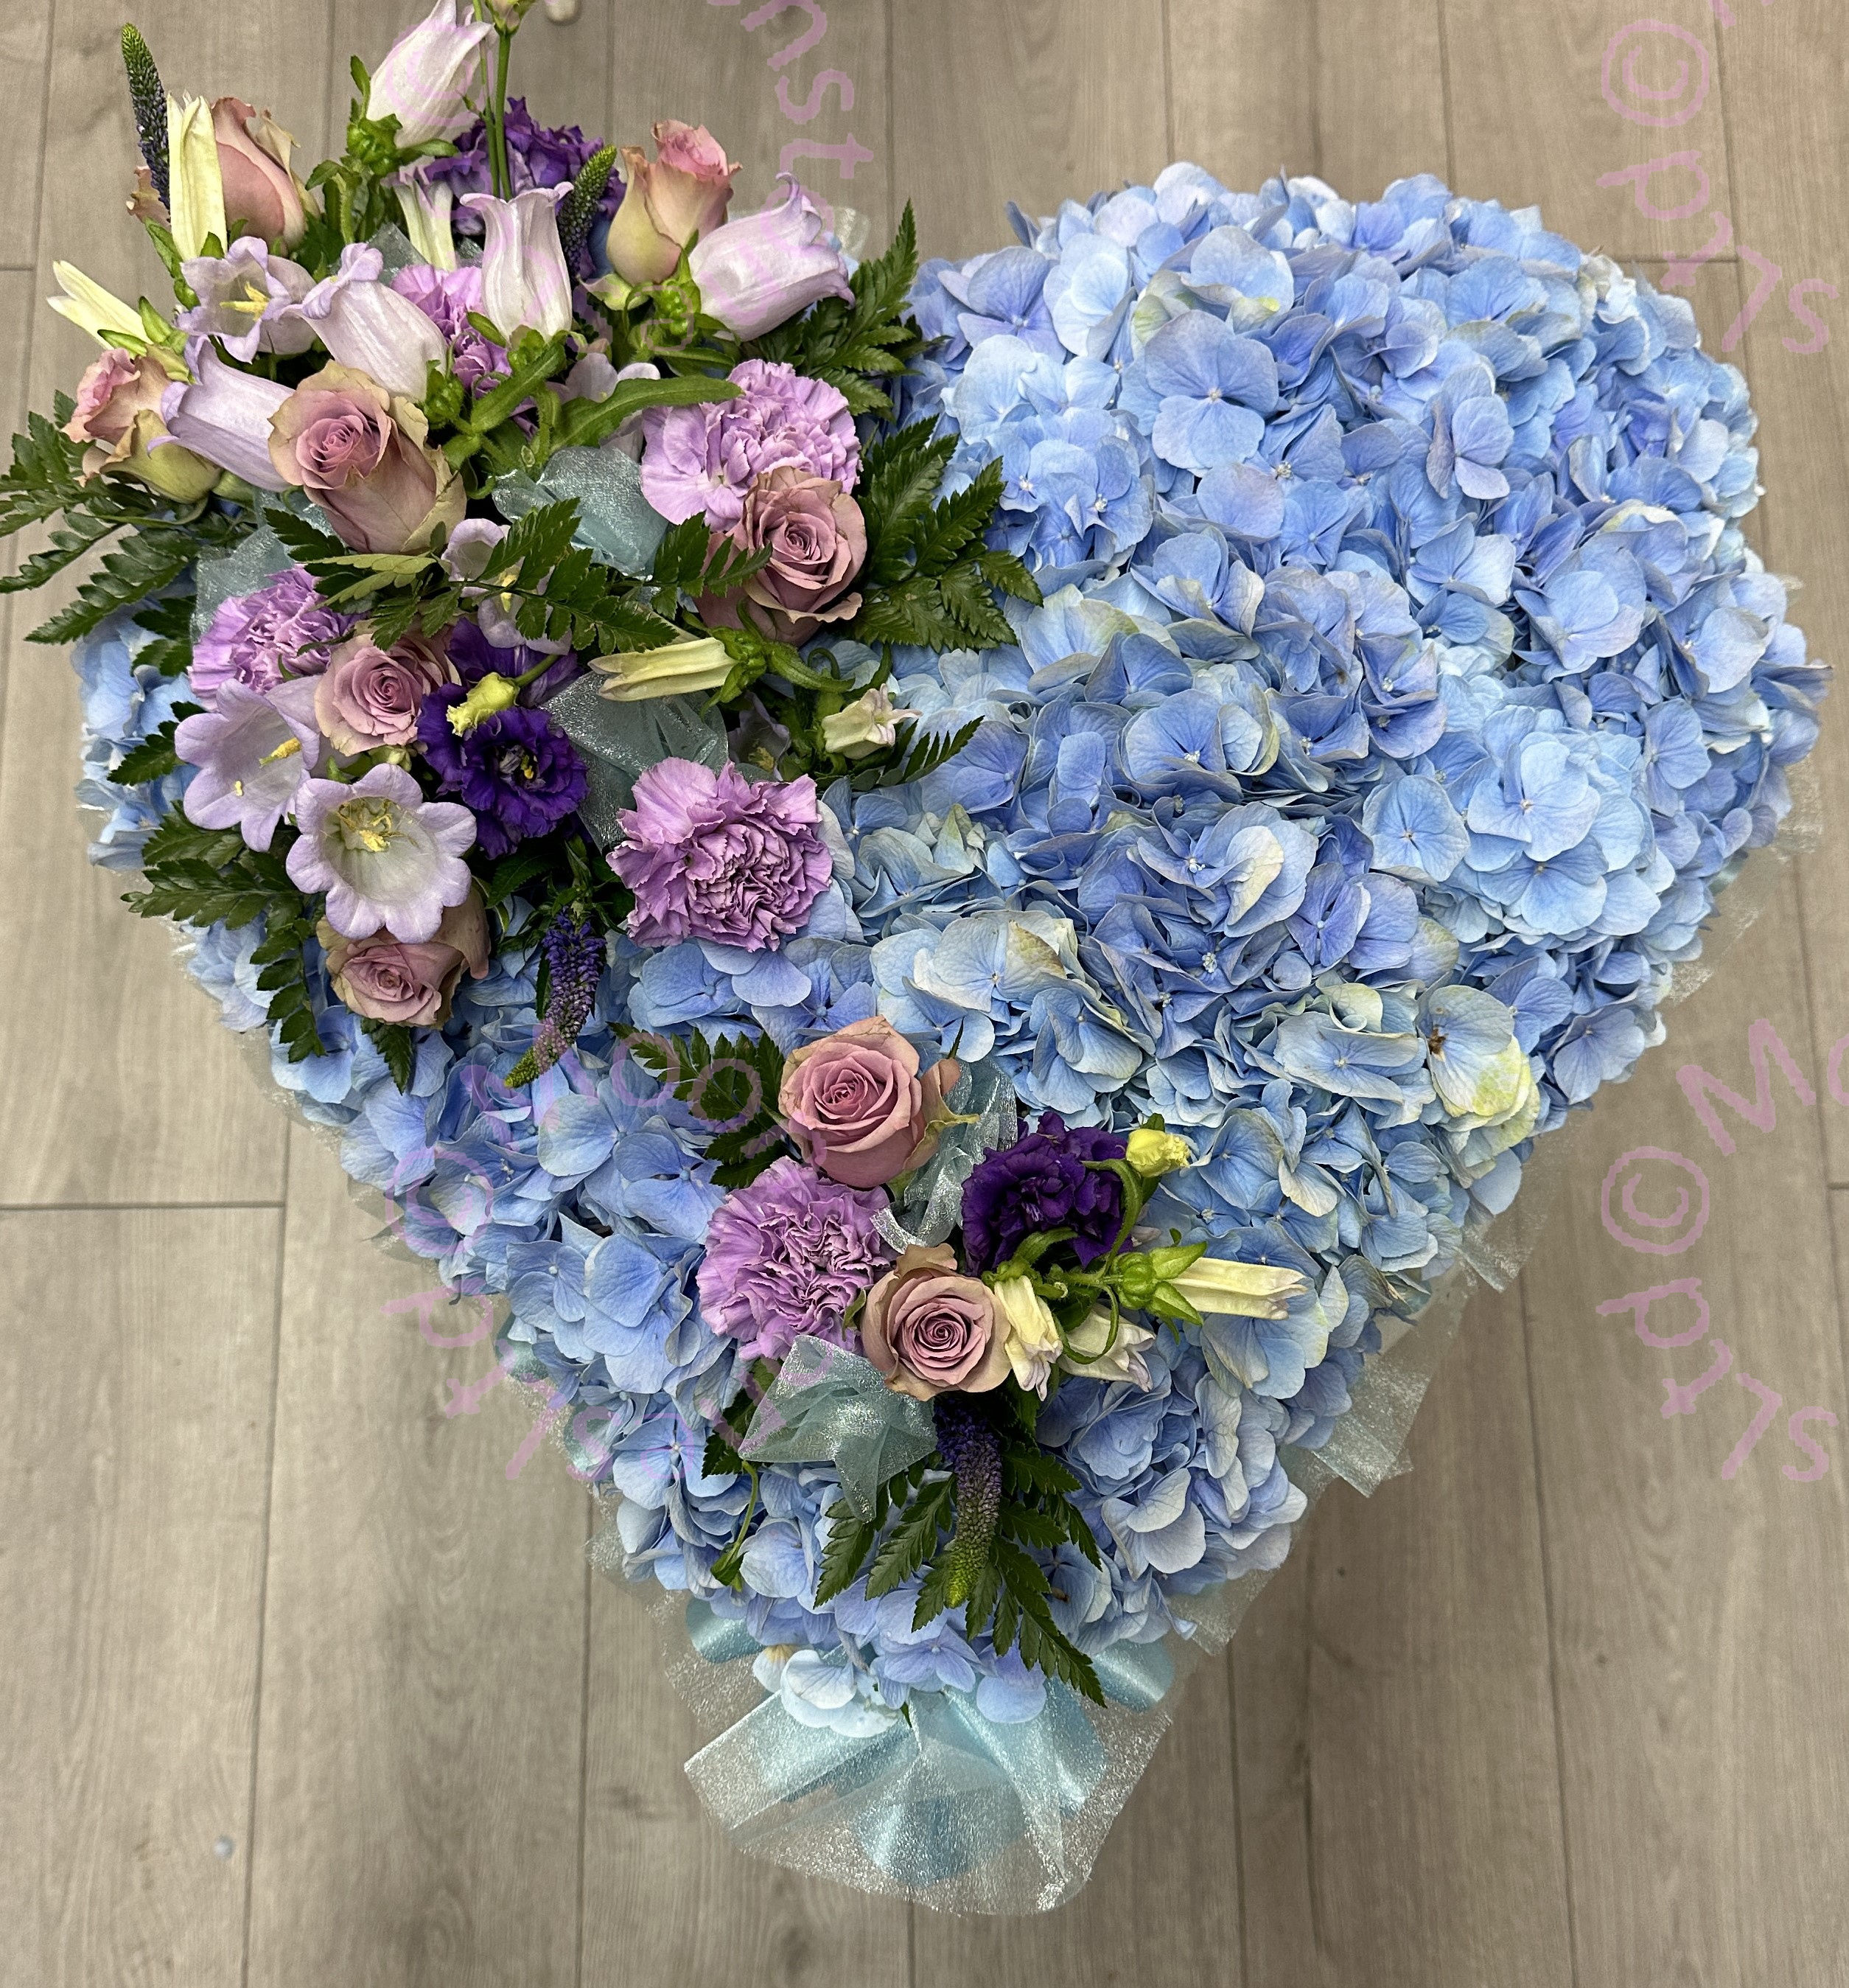 A funeral heart made of pale blue hydrangea with accents of lilac roses. 